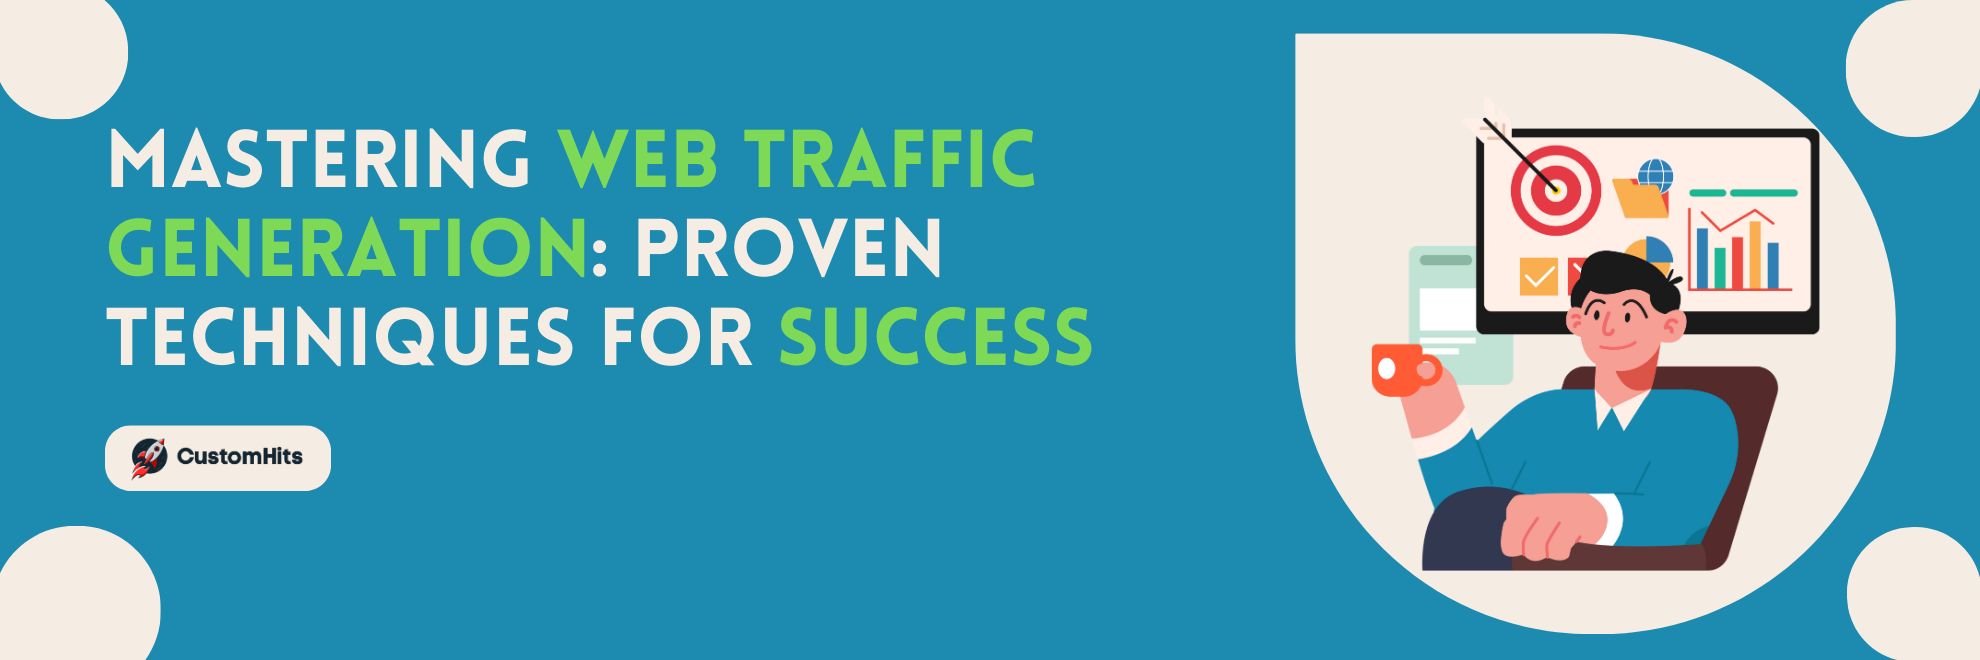 Mastering Web Traffic Generation: Proven Techniques for Success